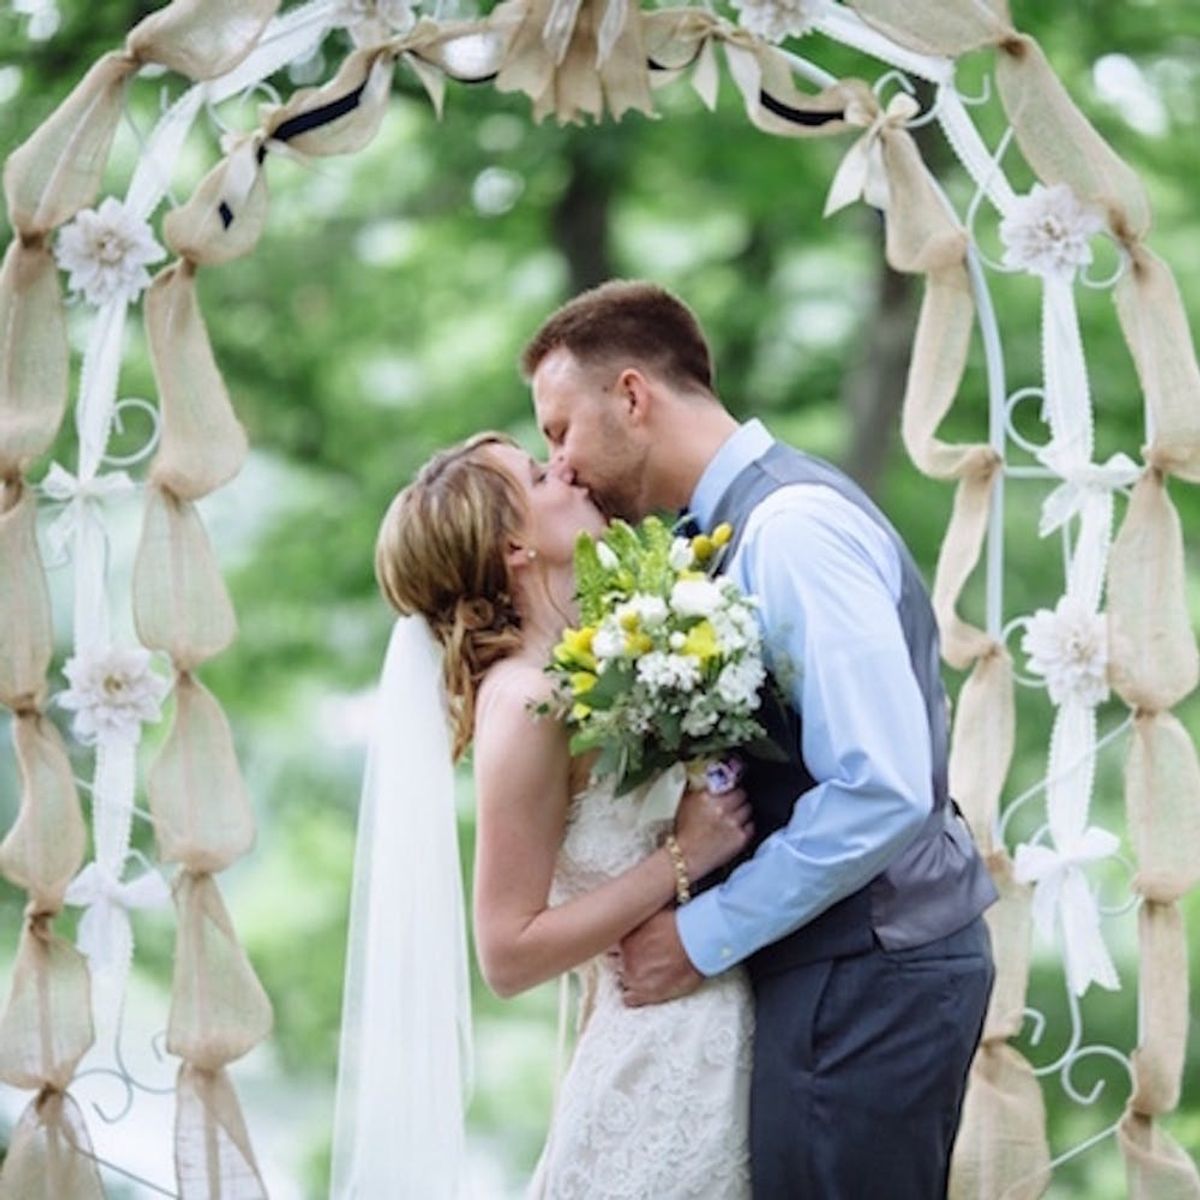 This Rustic Lakeside Wedding Is to DIY for